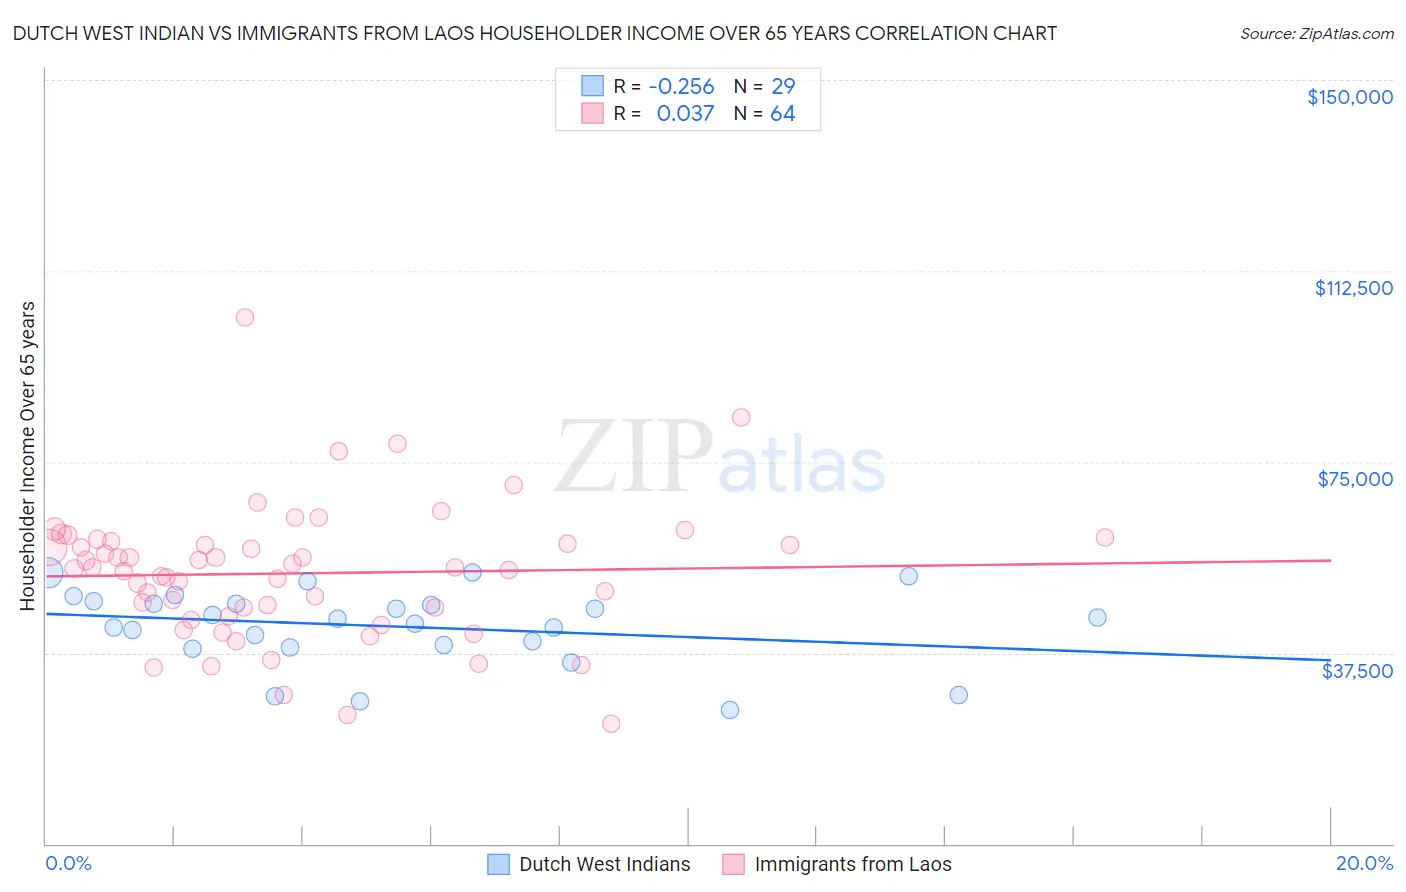 Dutch West Indian vs Immigrants from Laos Householder Income Over 65 years